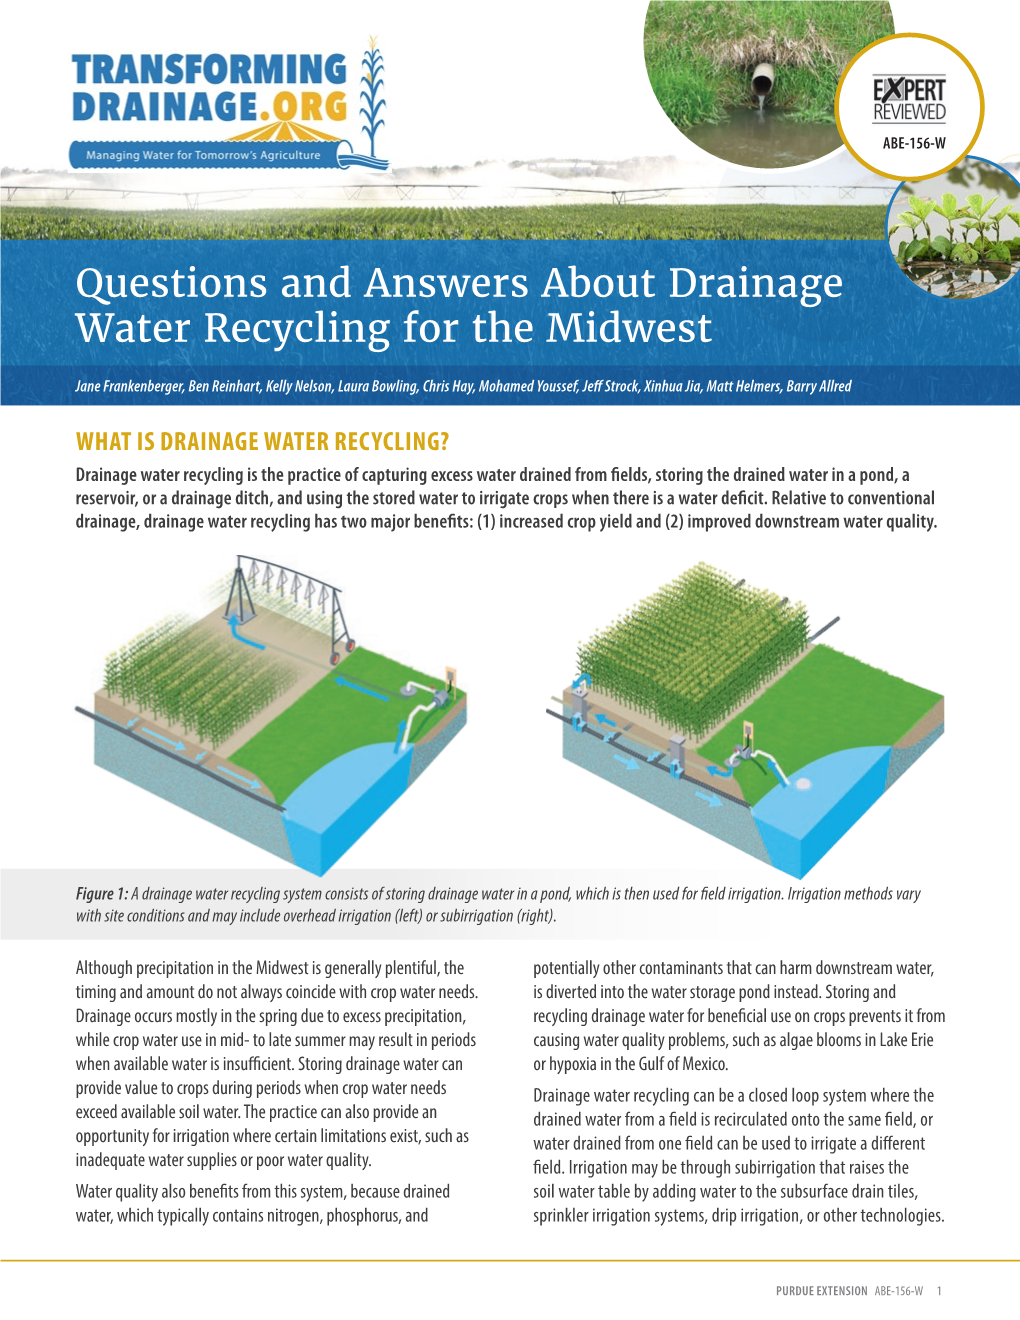 Questions and Answers About Drainage Water Recycling for the Midwest